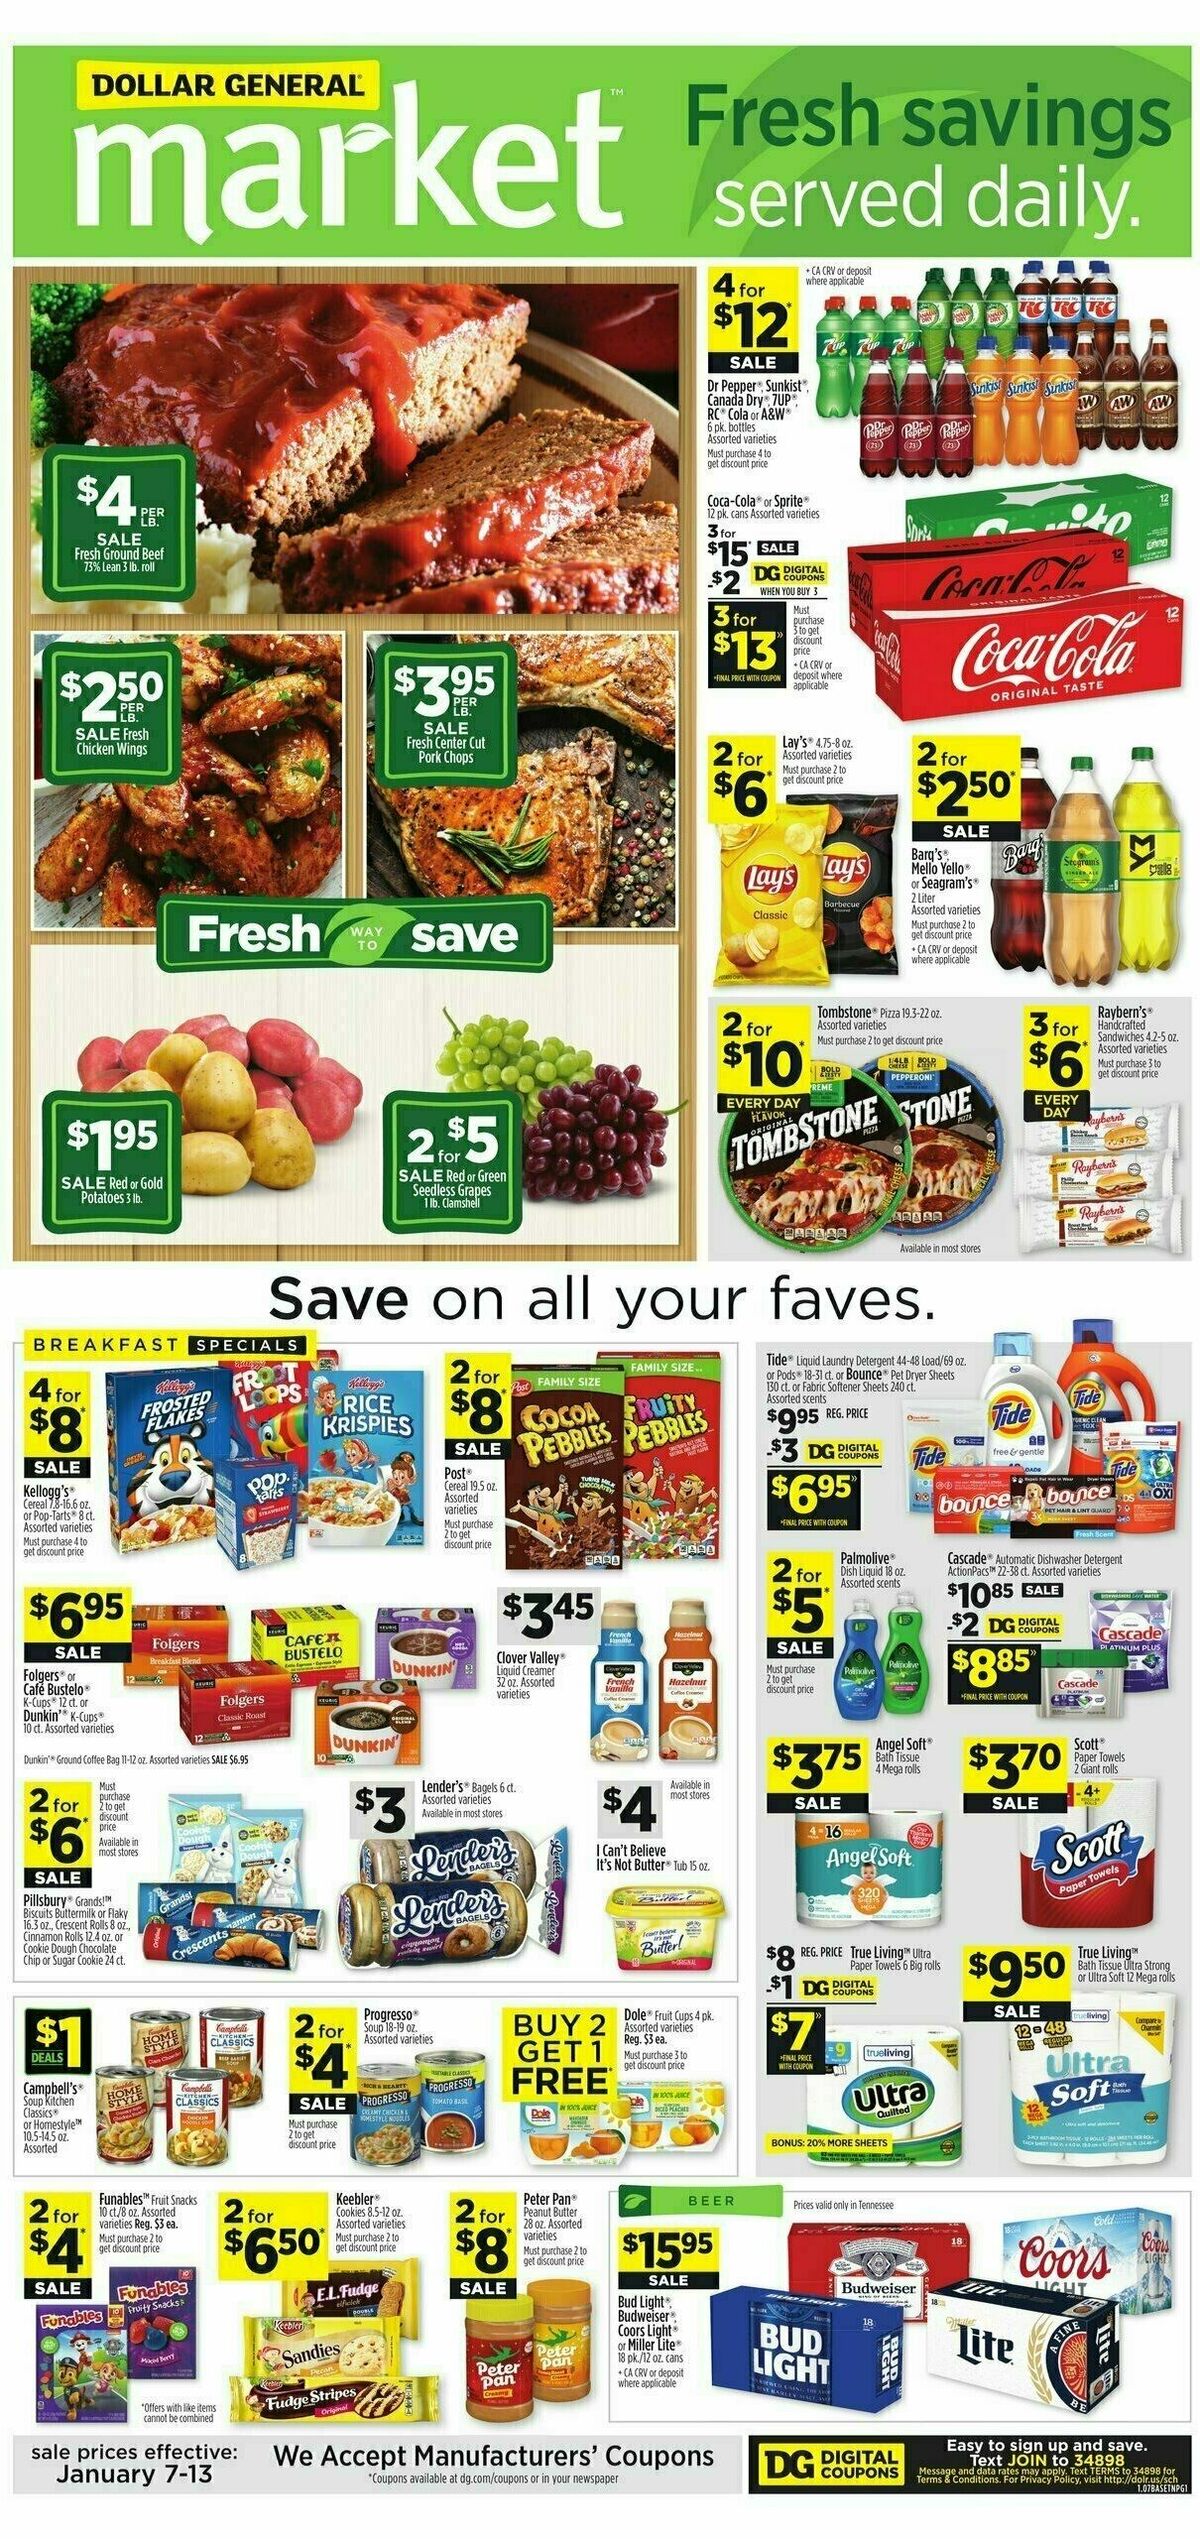 Dollar General Dollar General Market Ad Weekly Ad from January 7